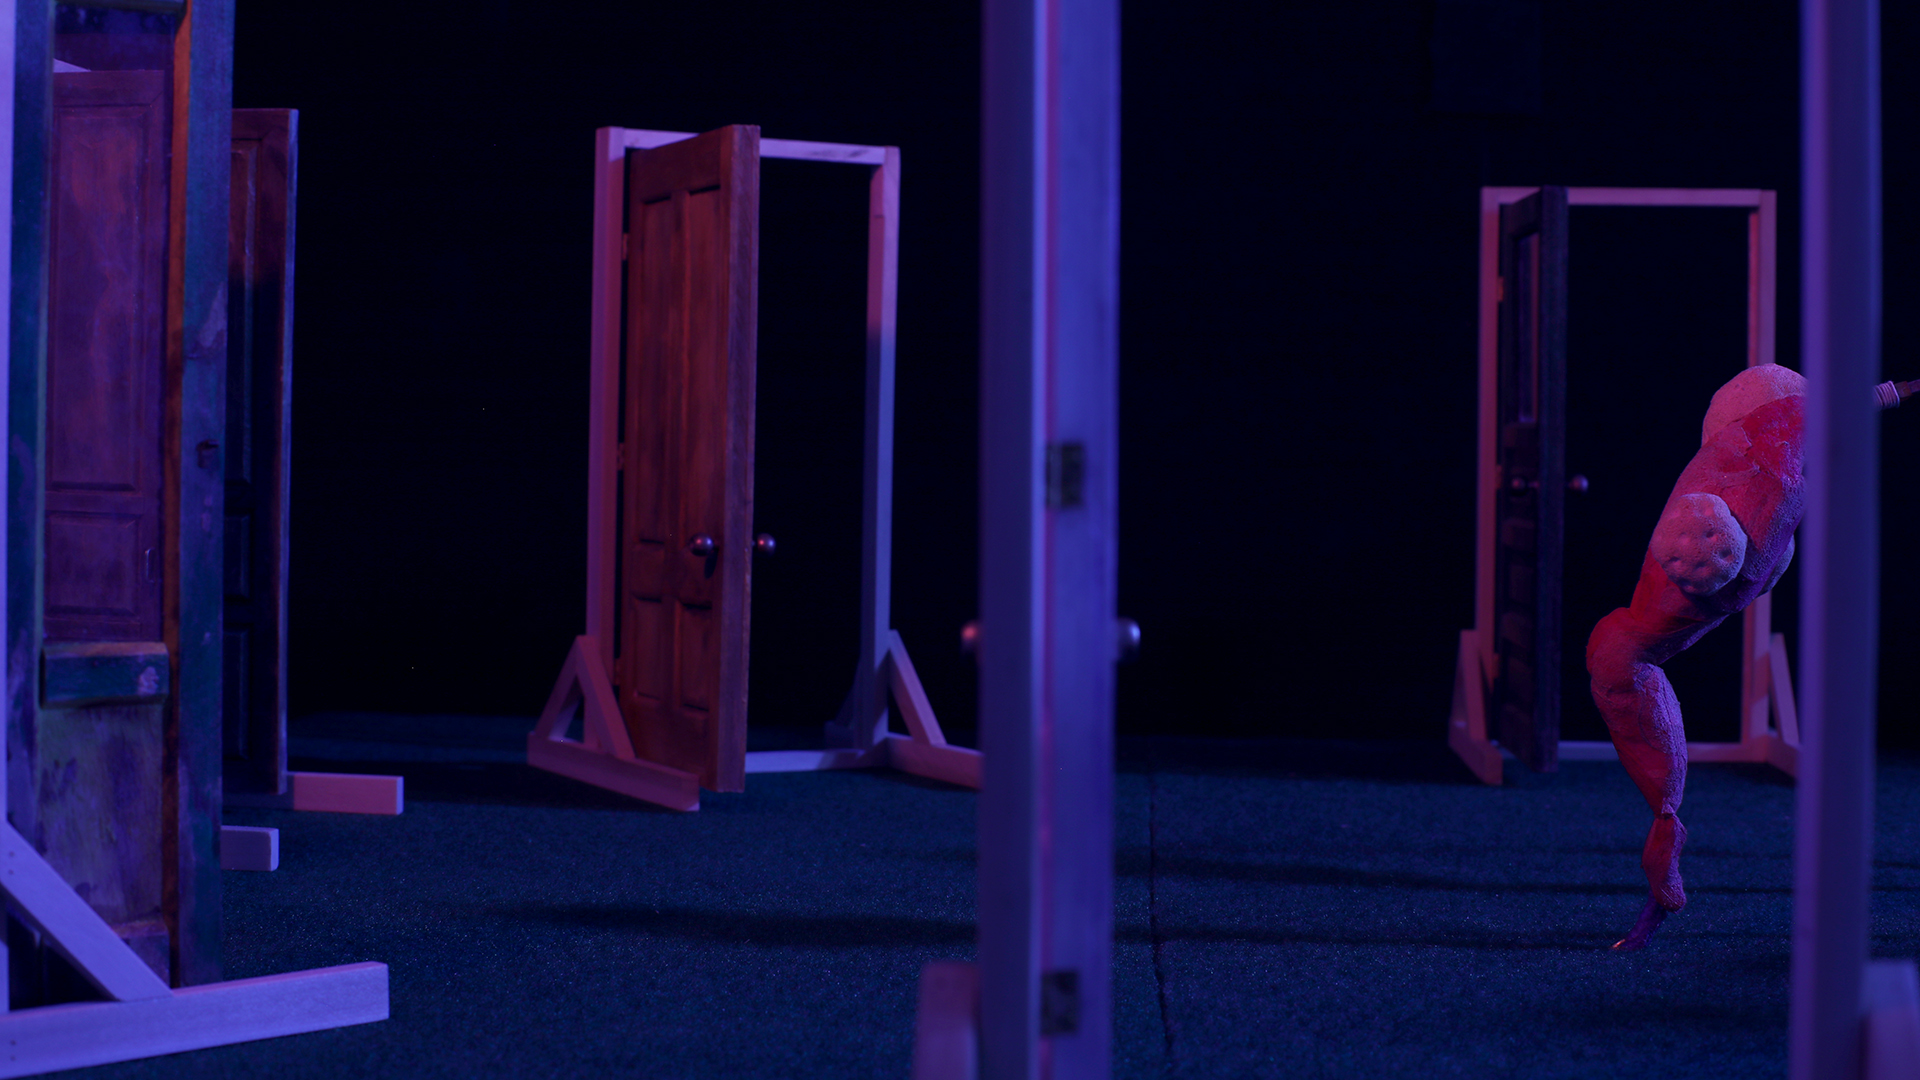 In this screen still from a puppet stop motion animation, four minature doors set in wooden frames are arranged in a dark room, lit in shades of deep purple and red. A strange, abstract wooden figure stands on one leg to the right, almost out of frame.